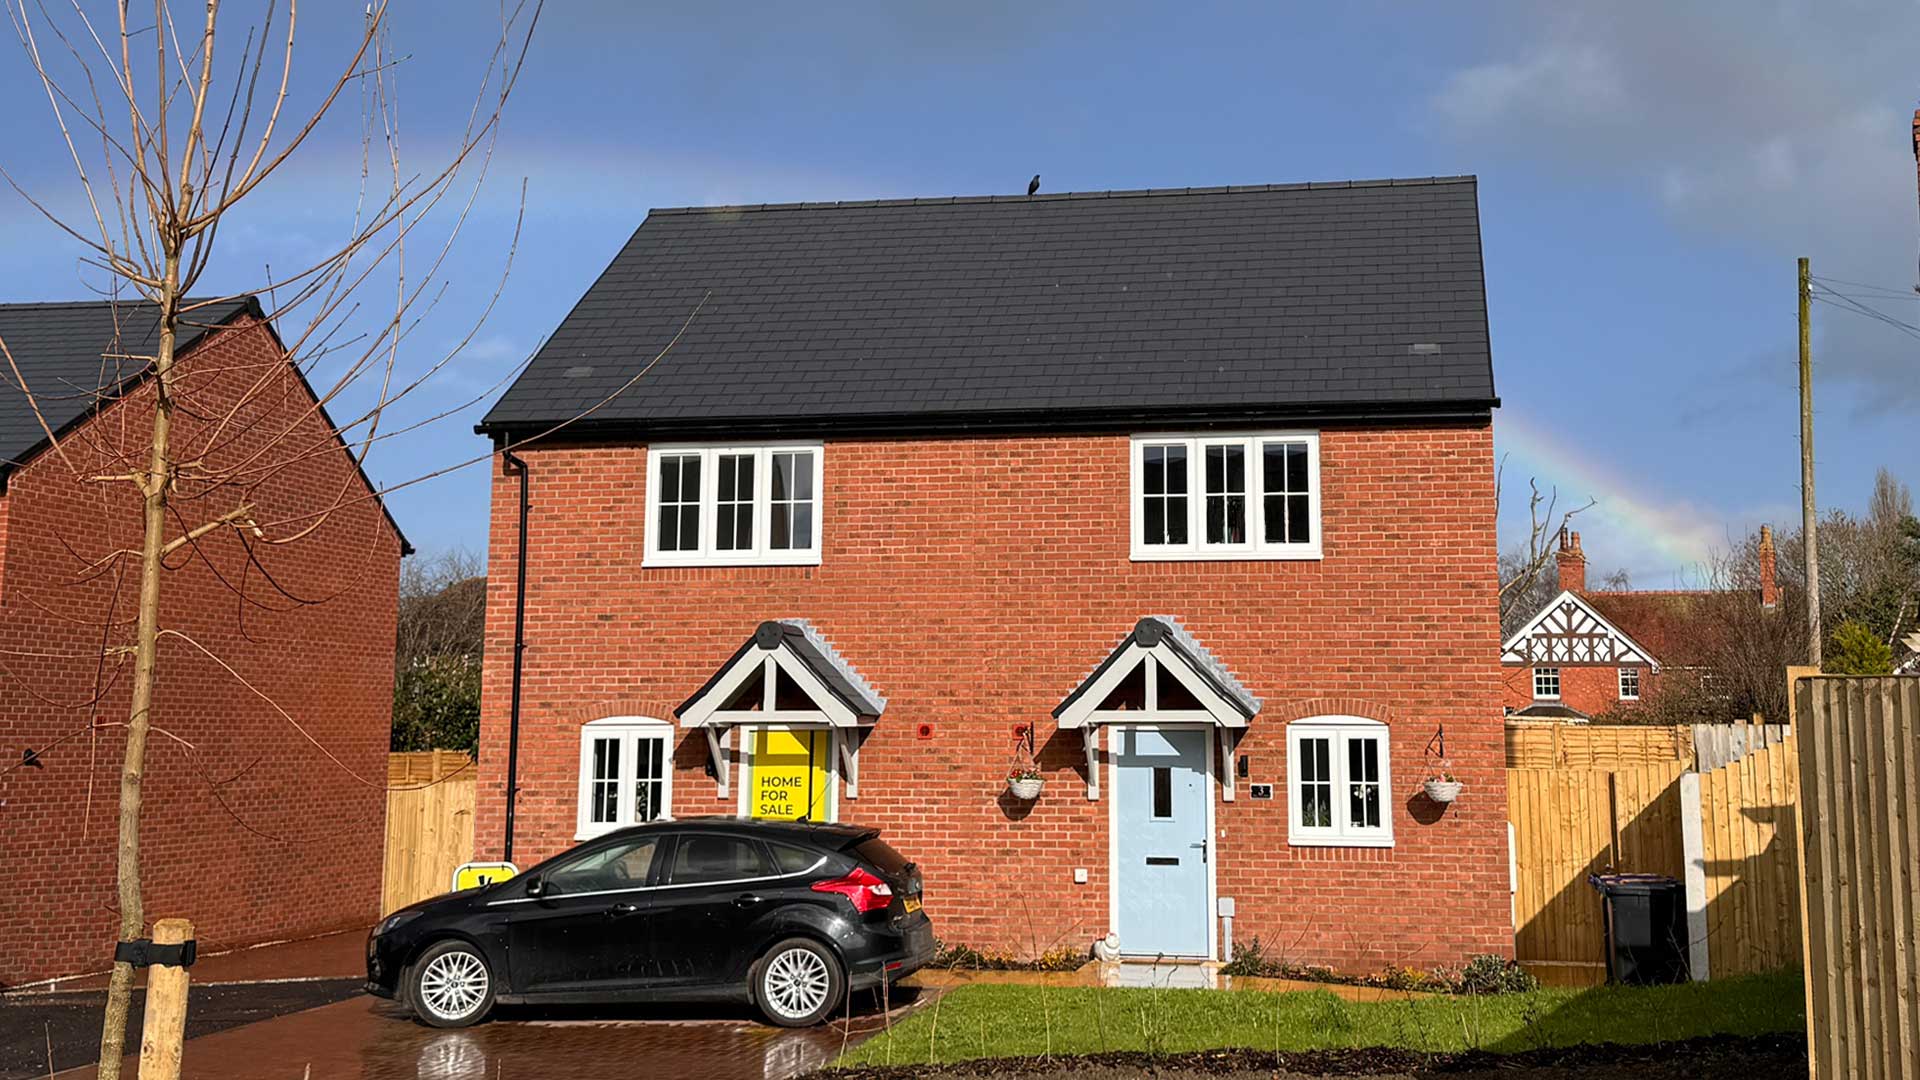 Laureate Ley- New houses in Shropshire